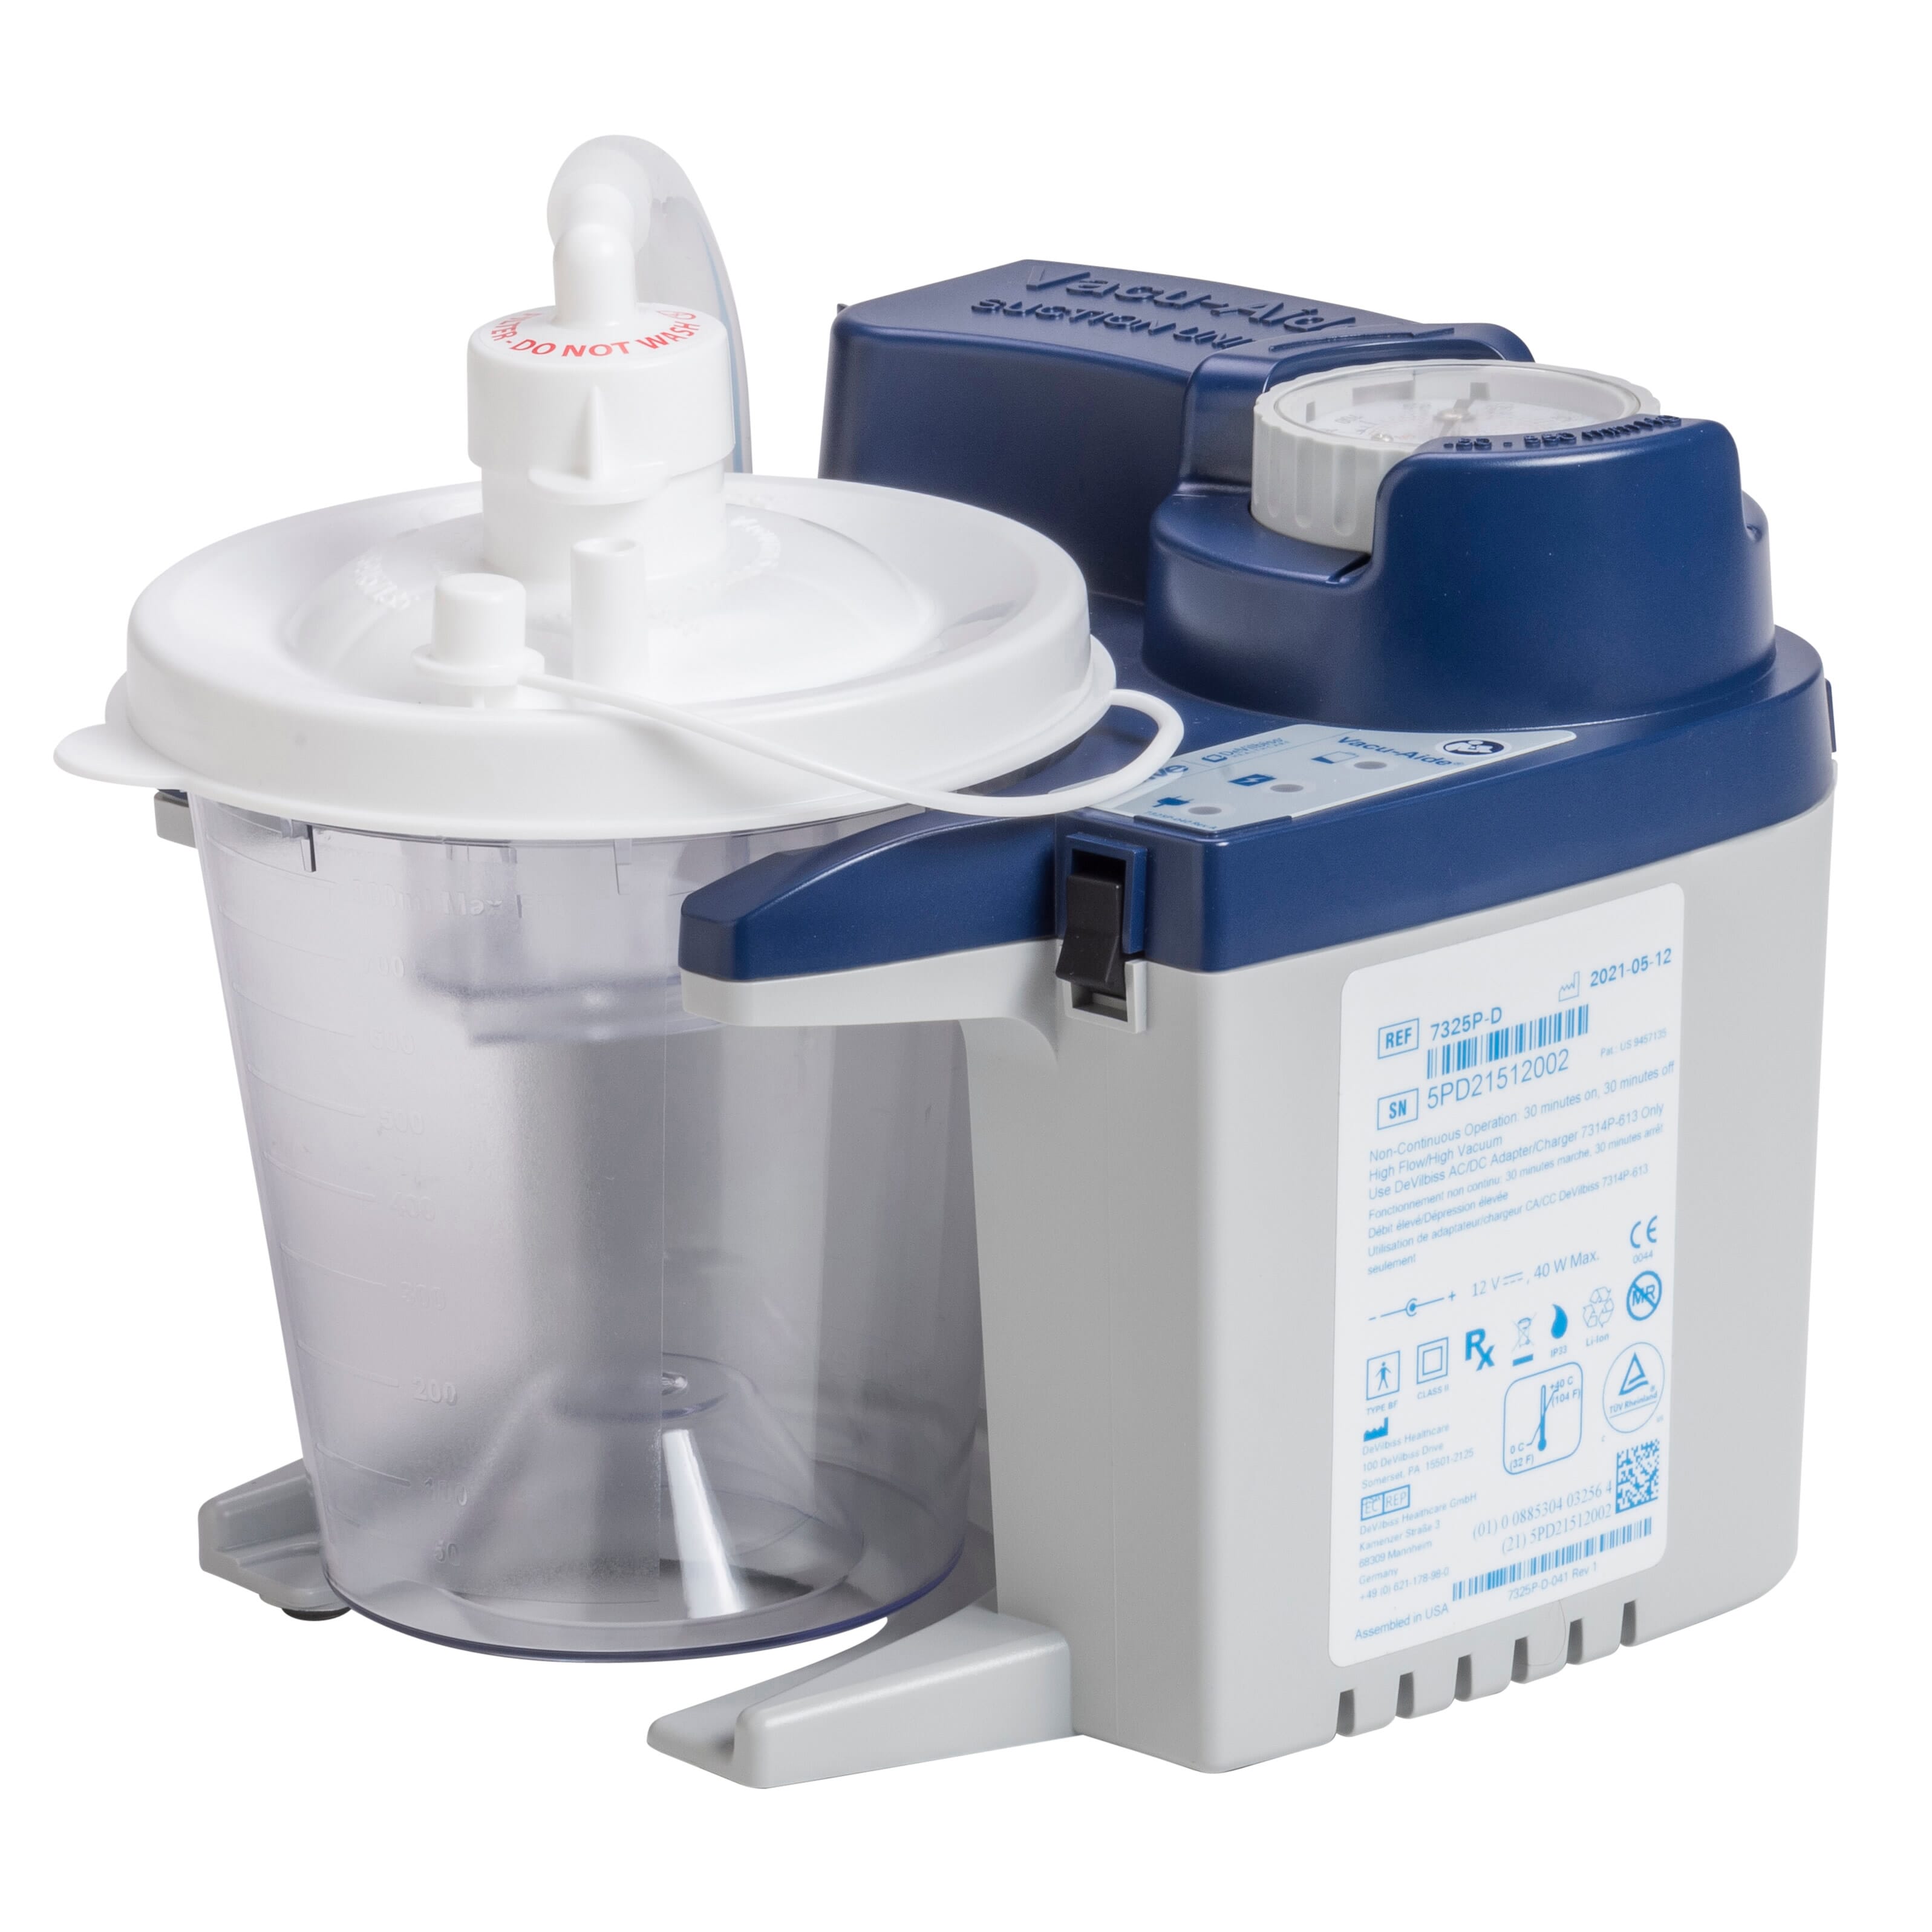 View VacuAide 7325 Portable Suction Unit information